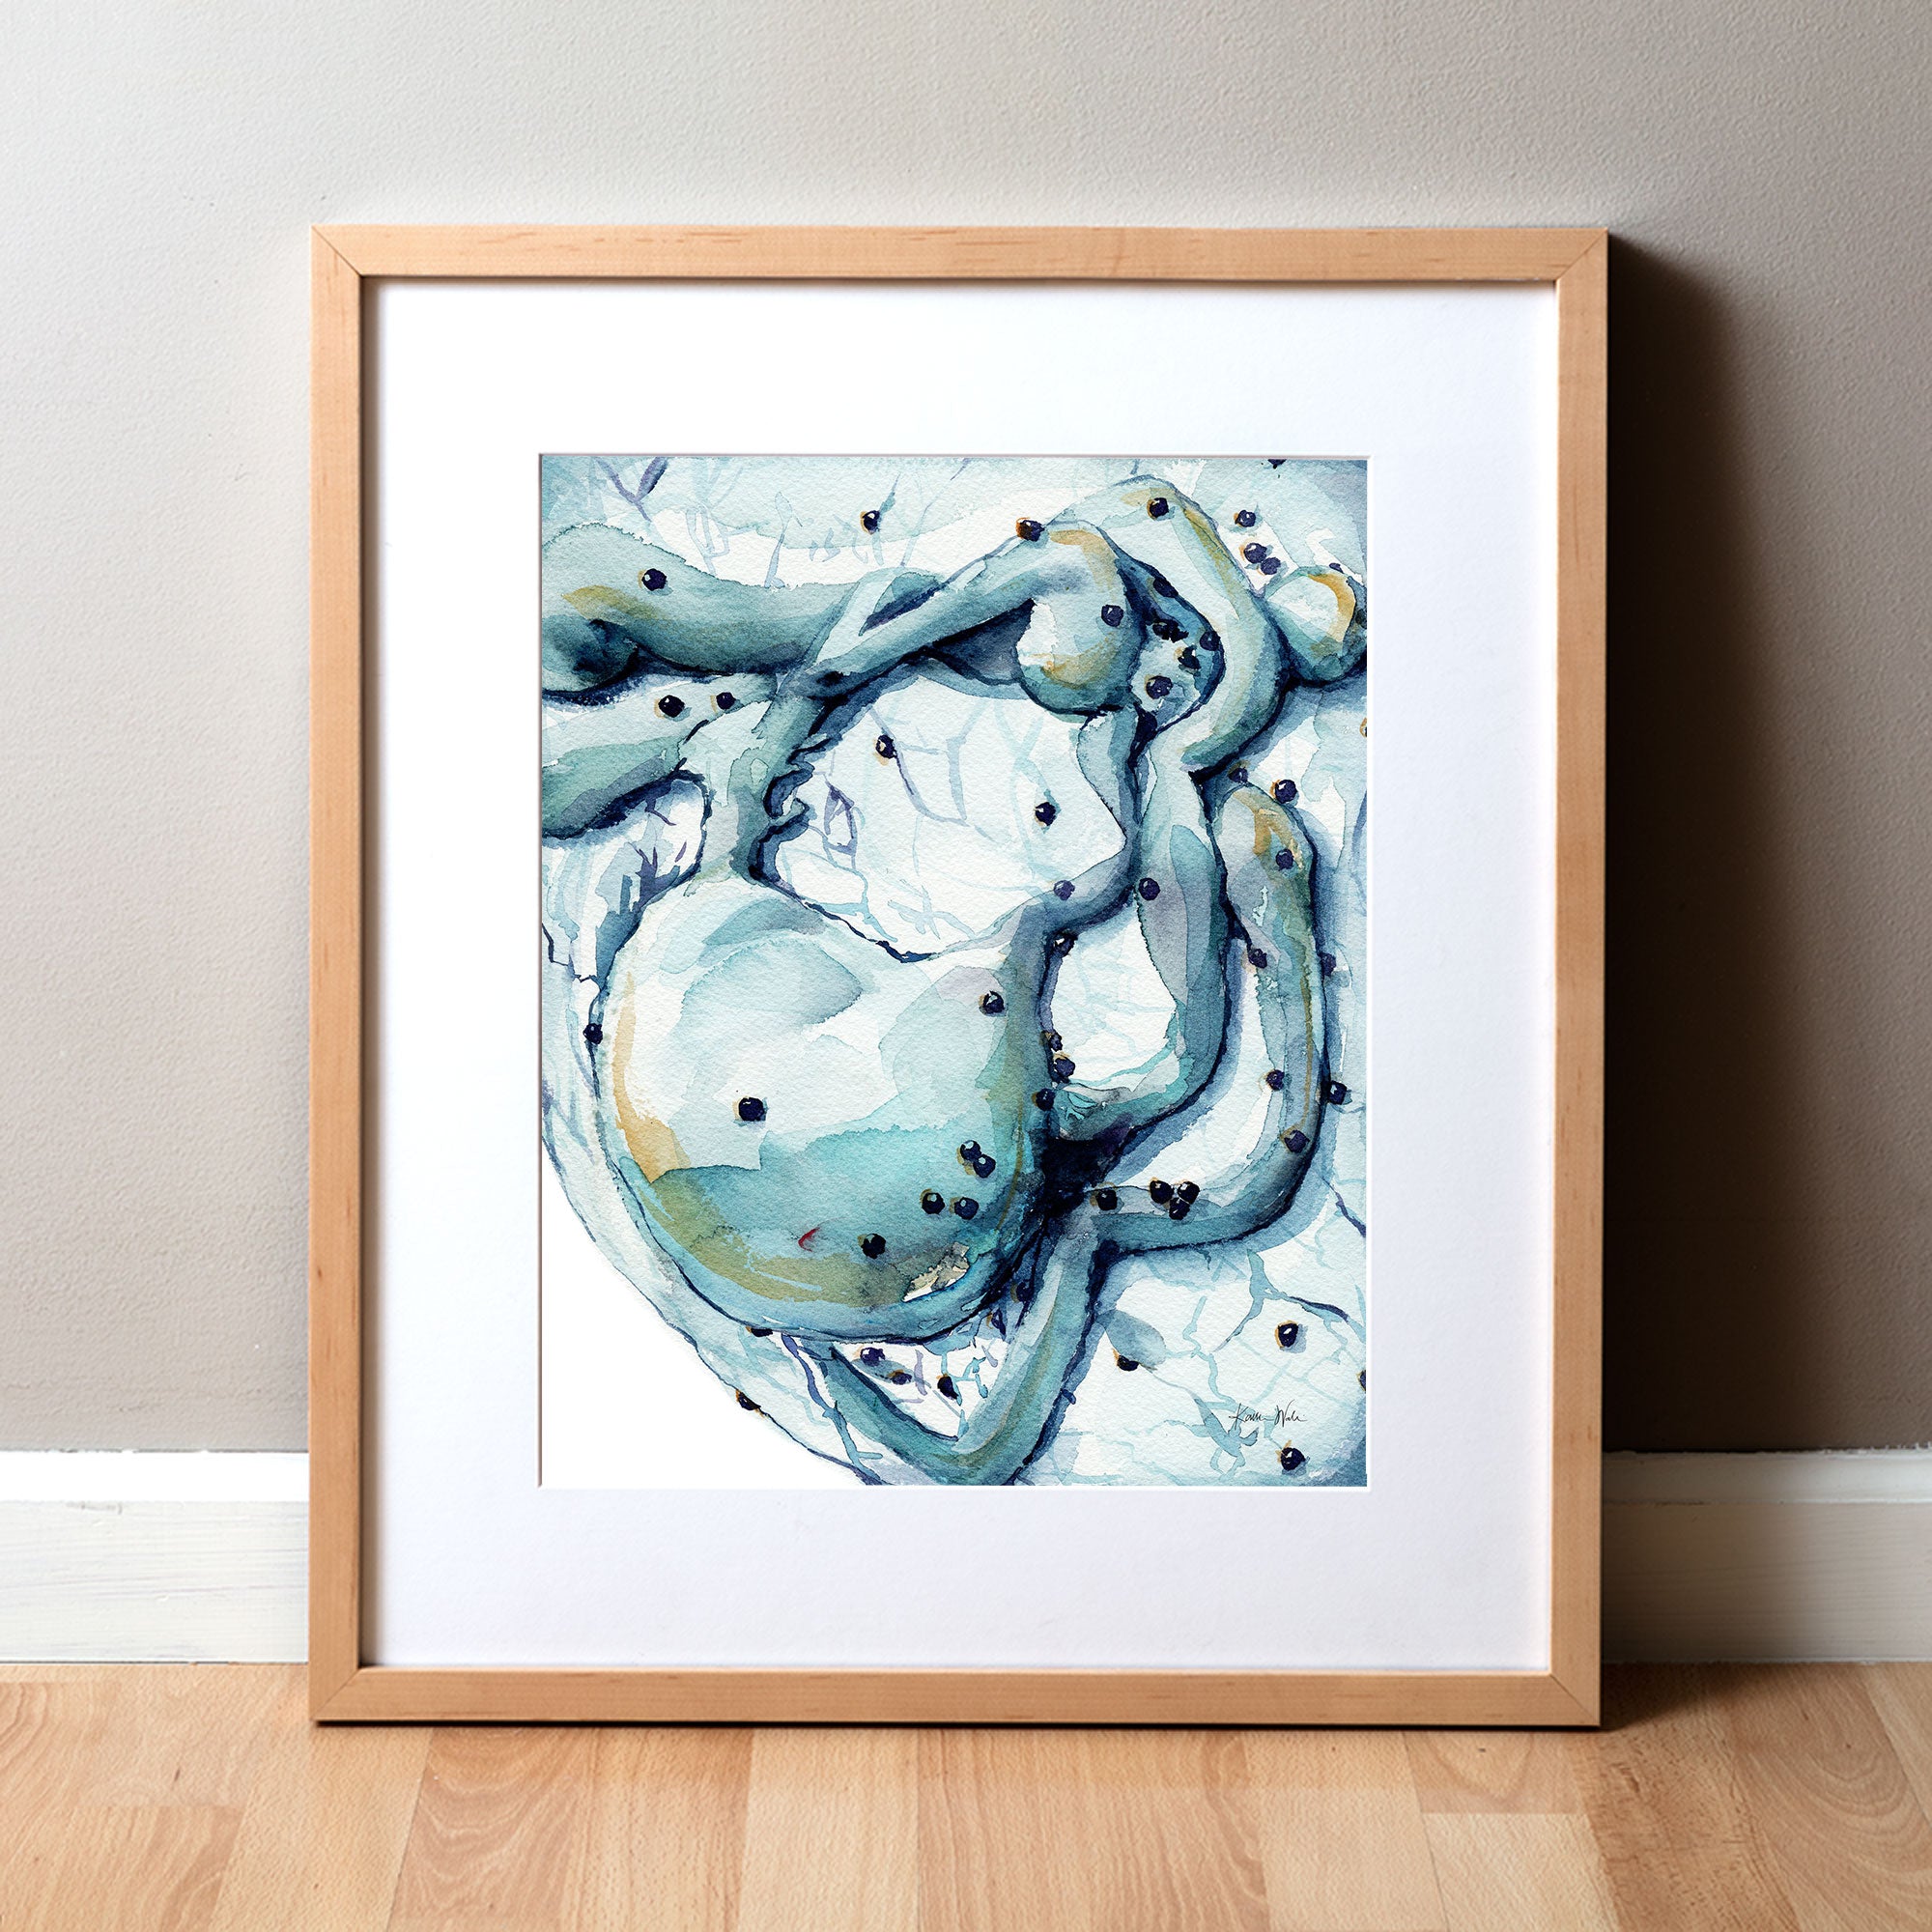 Framed watercolor painting of HIV embedding itself into a lymphocyte.